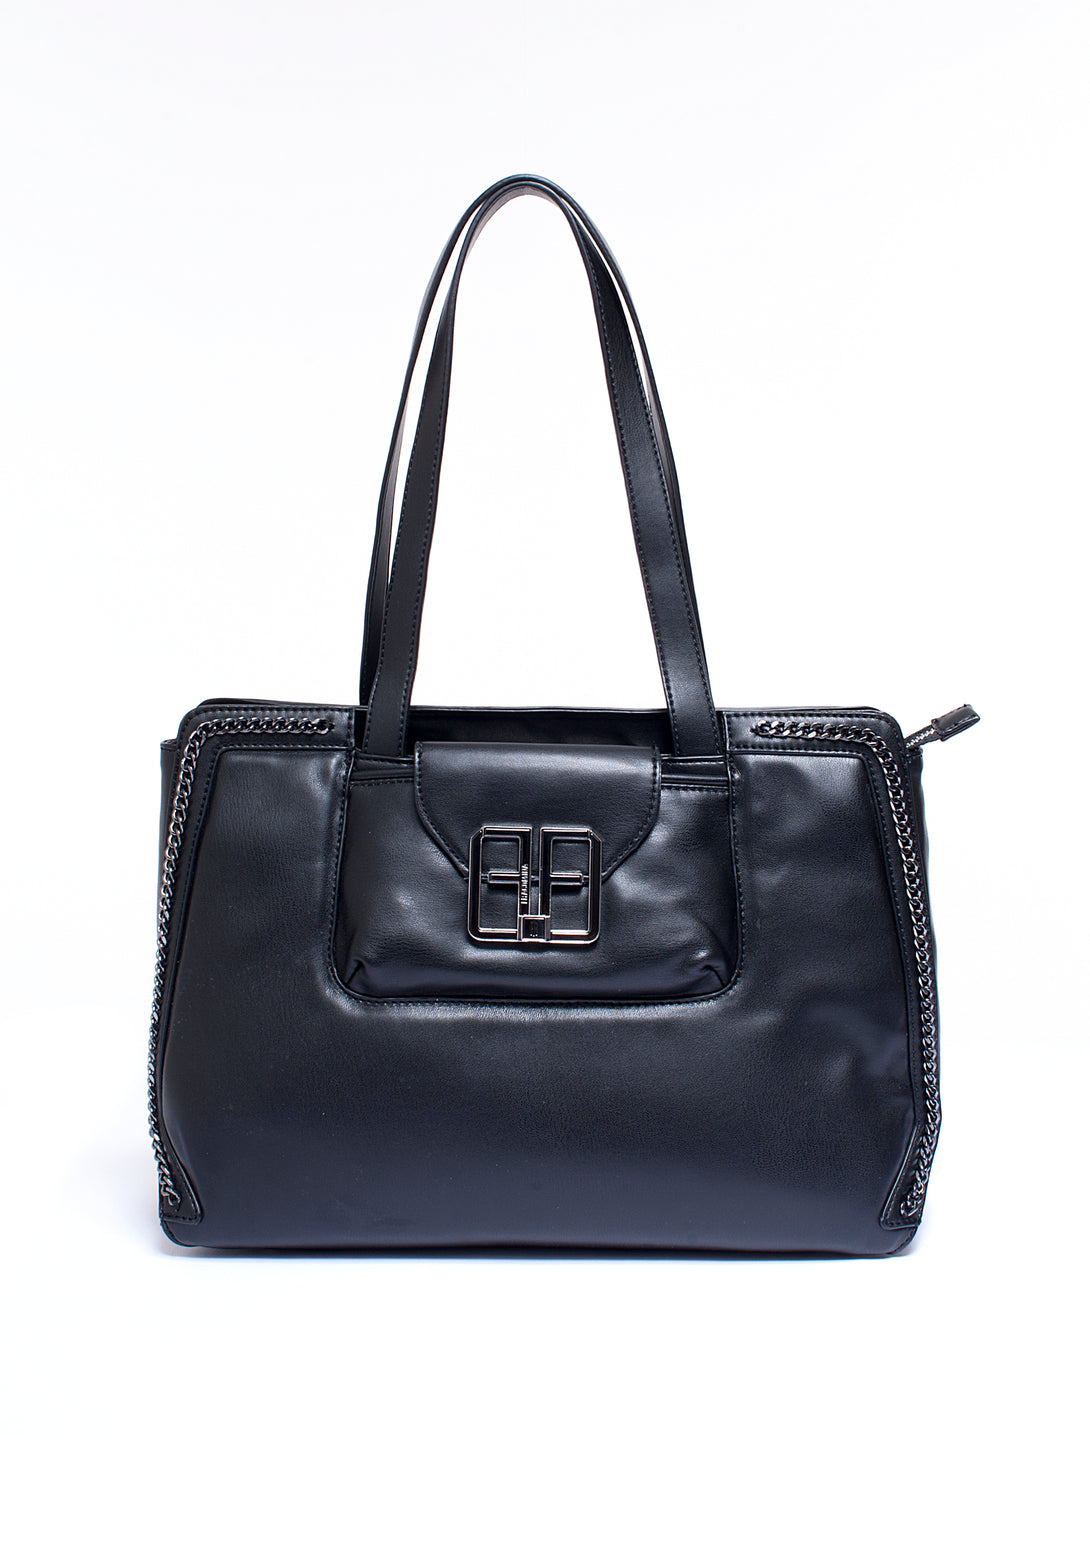 Shopping bag made in eco leather with chain Fracomina FA21WB1004P41101-053_00d51a90-da0d-4b8c-bf70-b5fd4ff18796